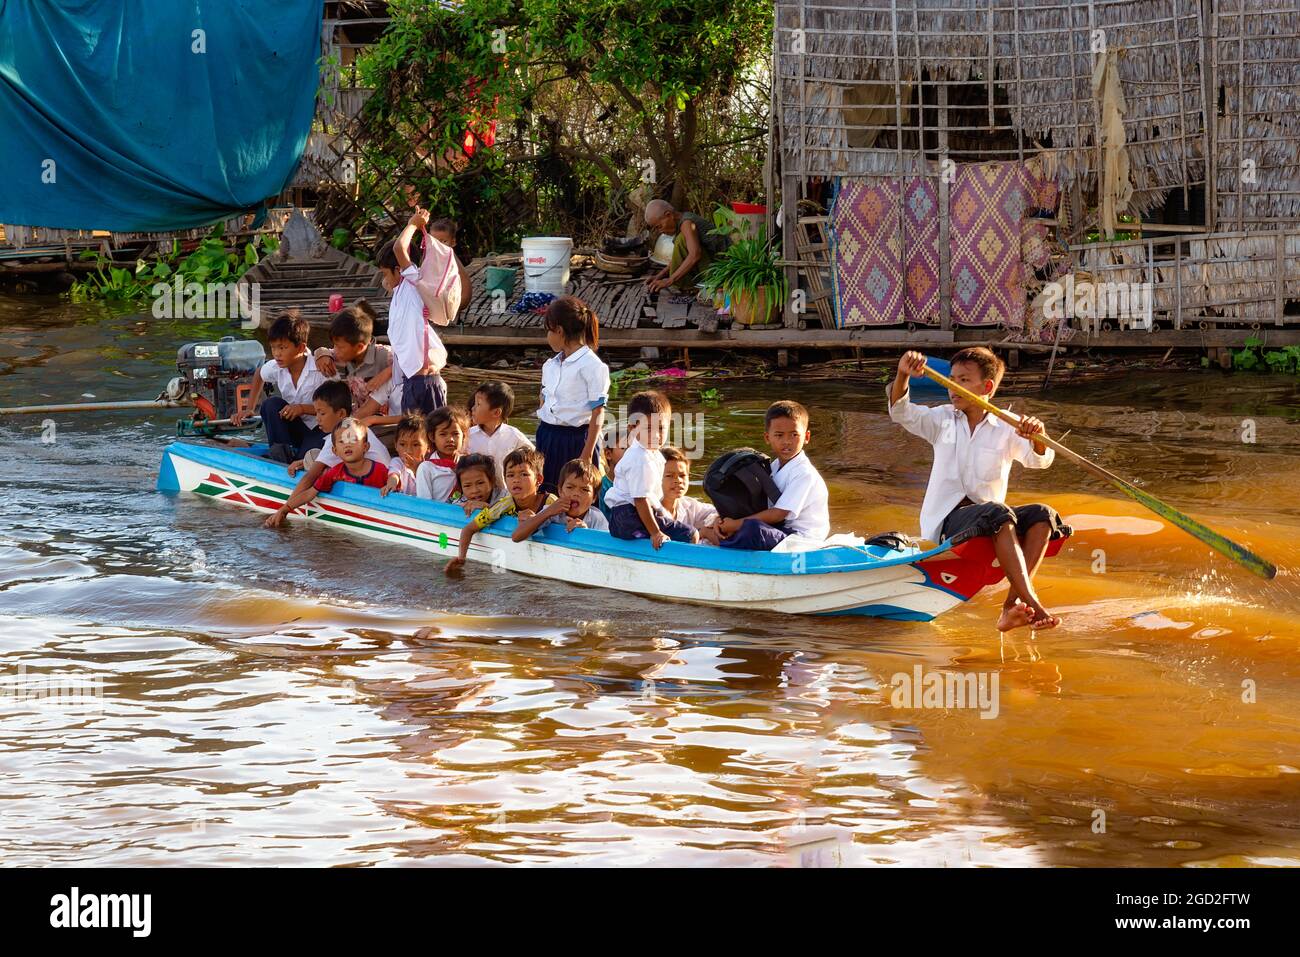 Tonle Sap lake, Cambodia - January 04, 2017: Students on a full boat return home after school. About 80,000 people live on the water permanently Stock Photo